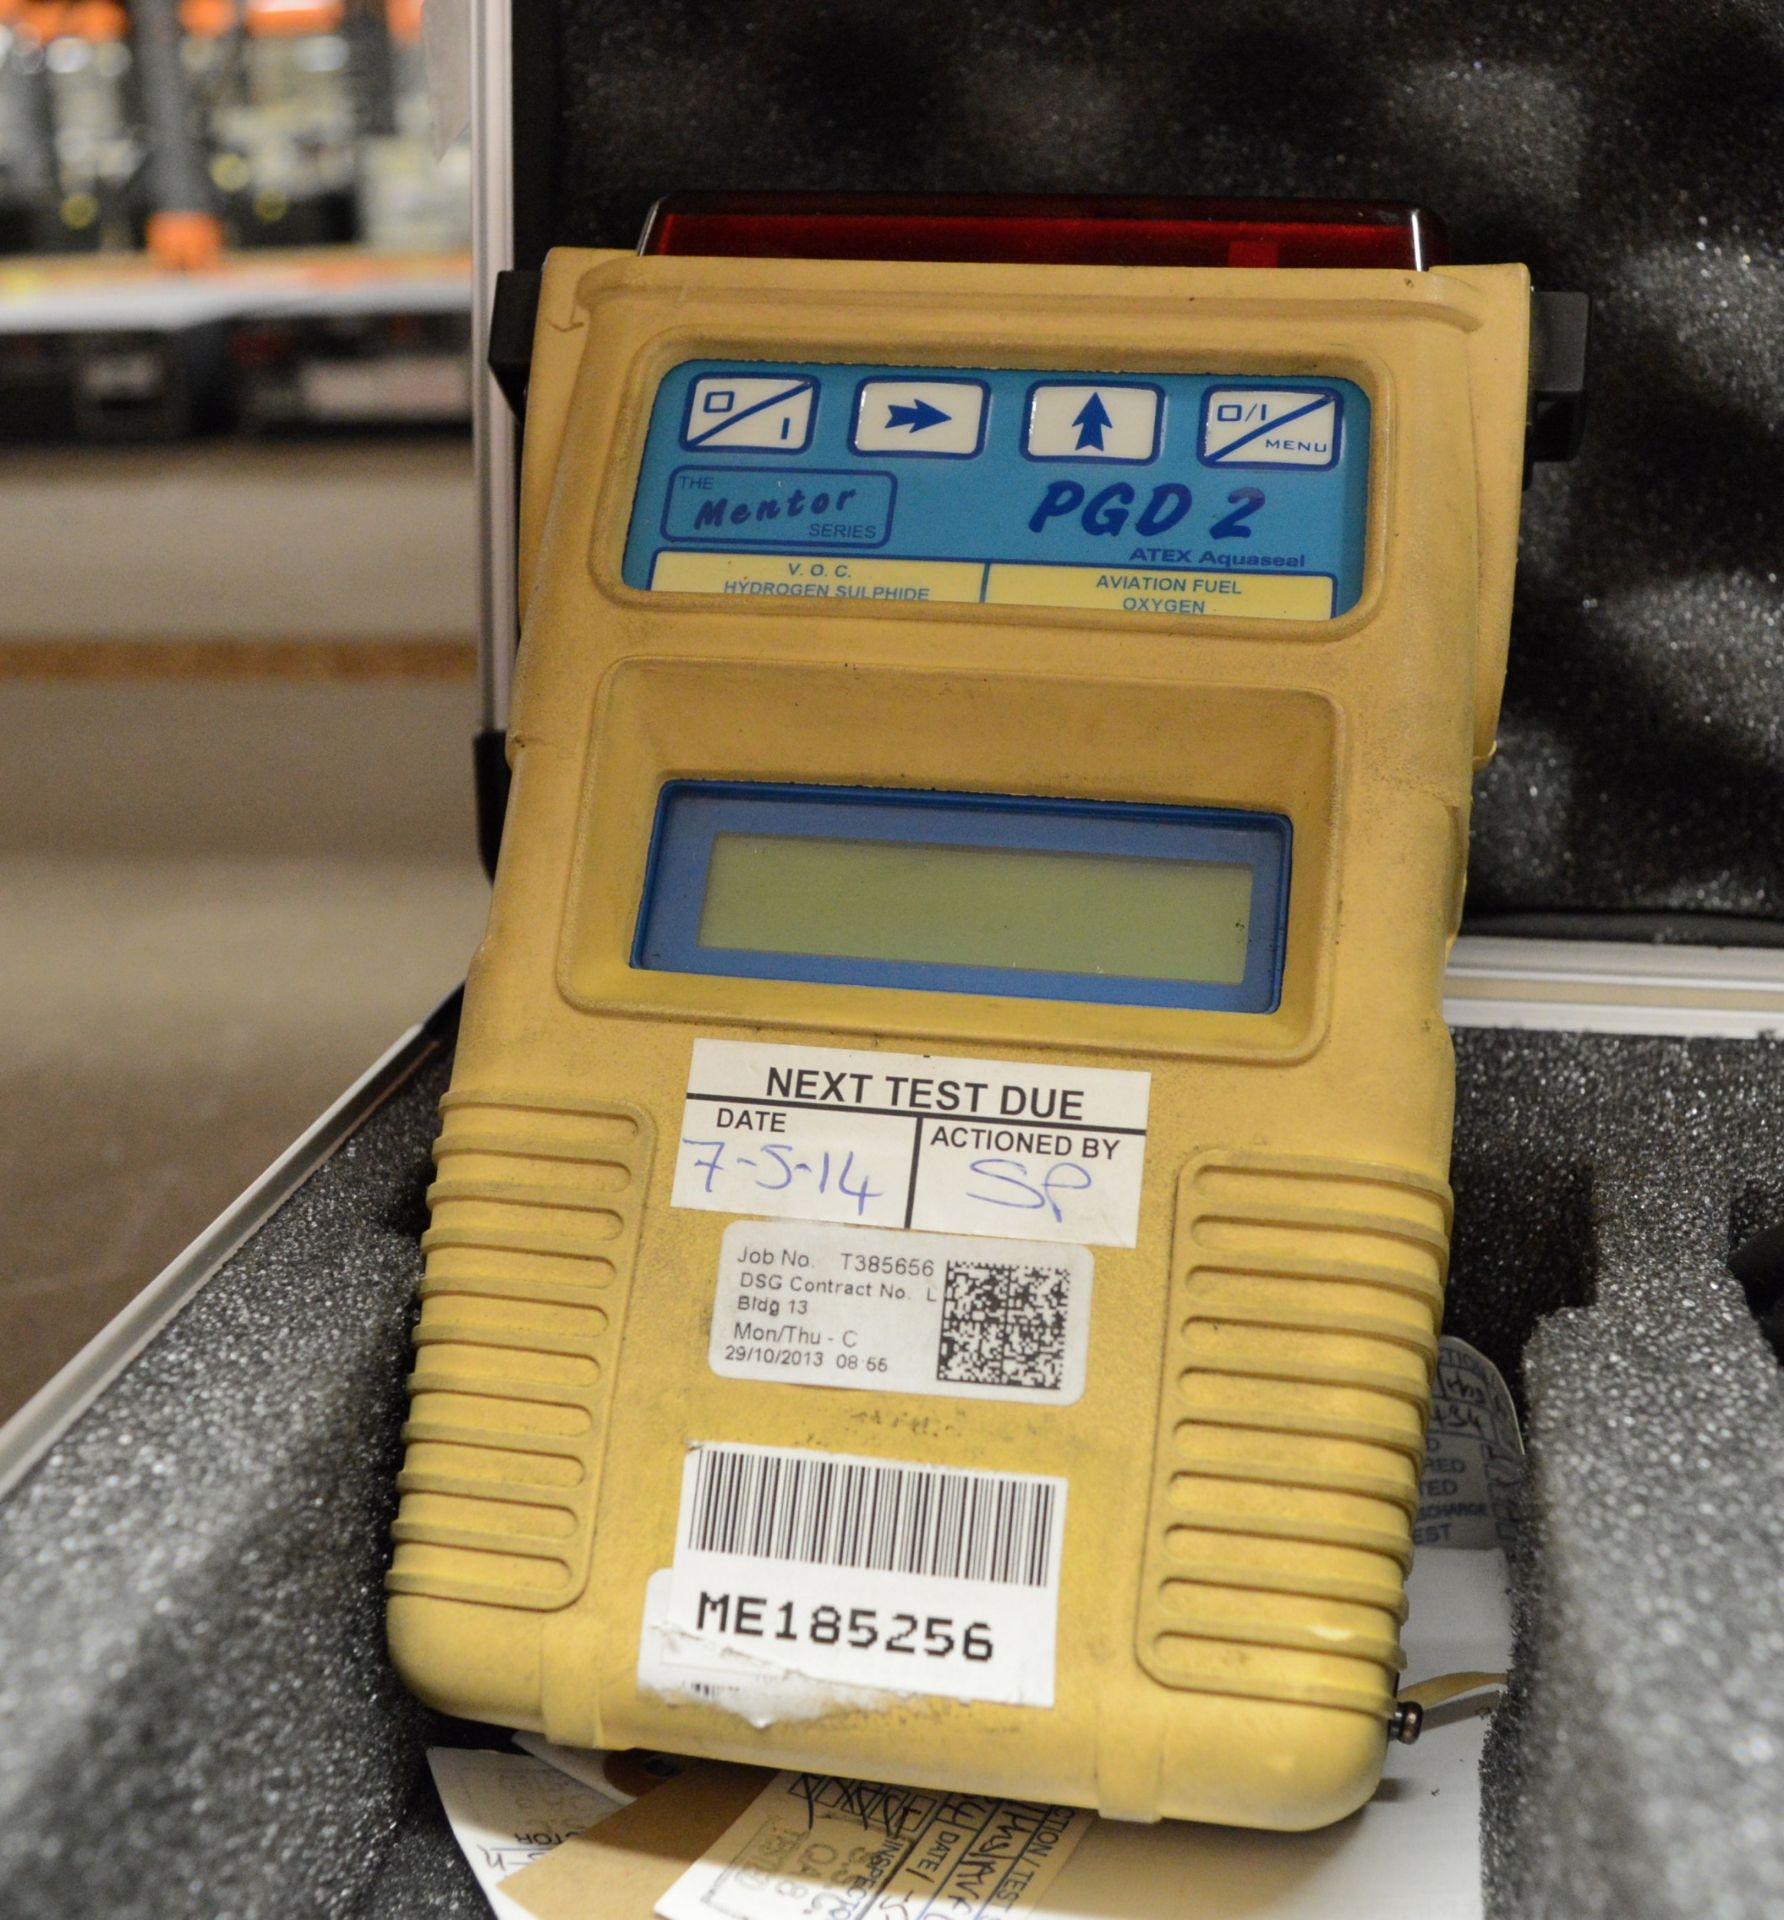 The Mentor Series PGD2 portable gas detector kit - Image 2 of 3